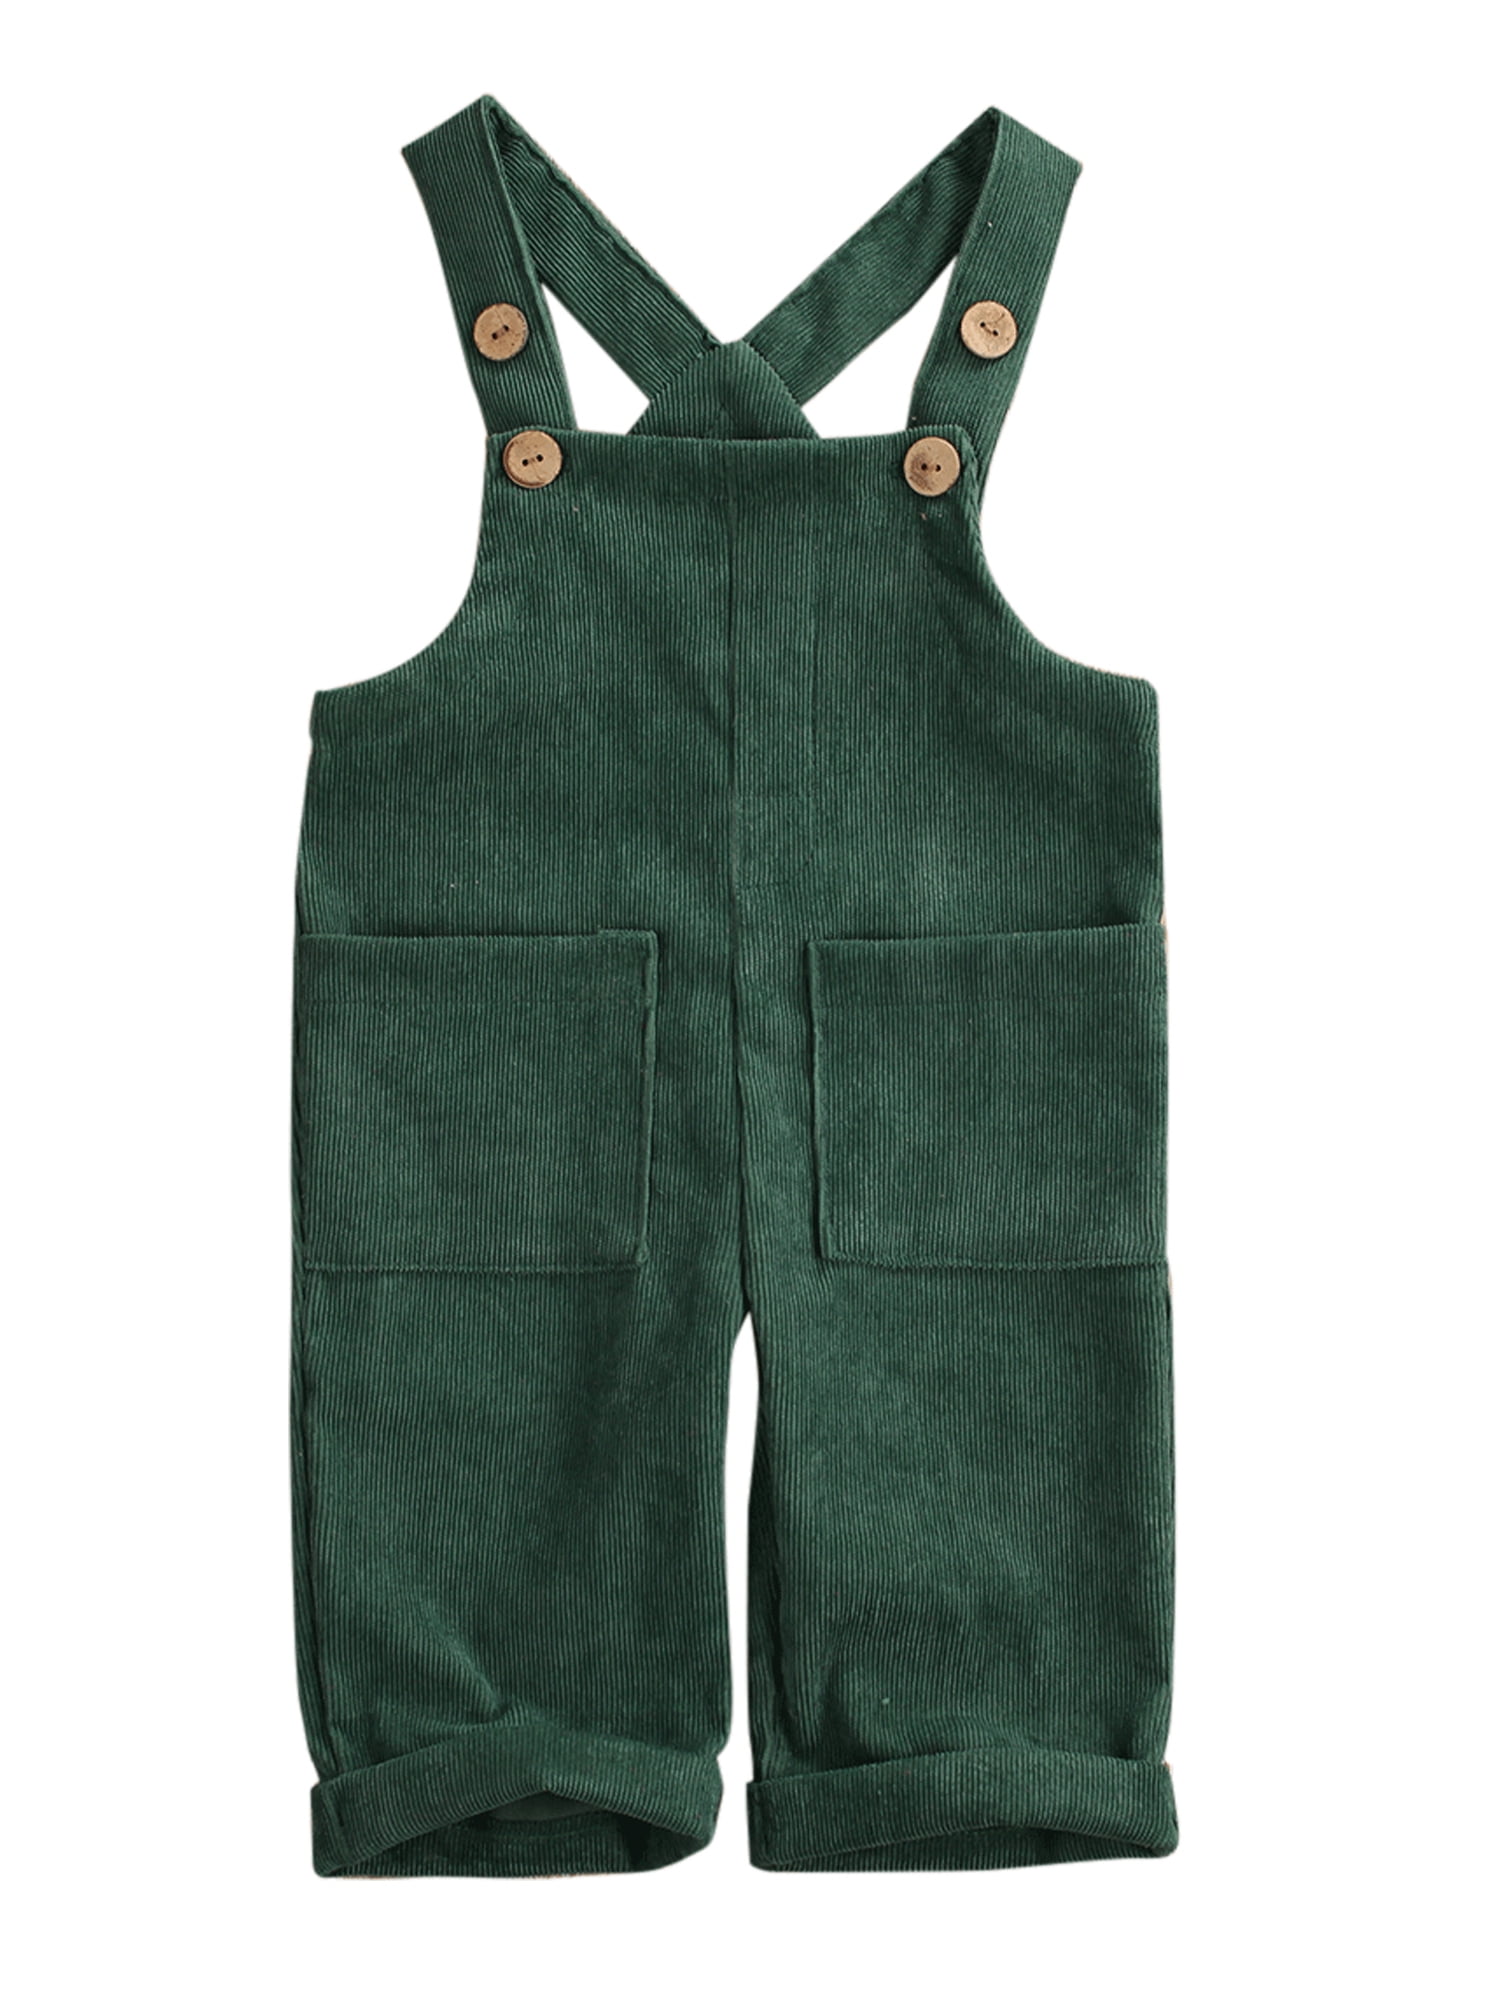 Toddler Kids Baby Girl Boy Overall Suspender Pants Patch Corduroy Jumpsuit Fall Winter with Two Pockets Clothes